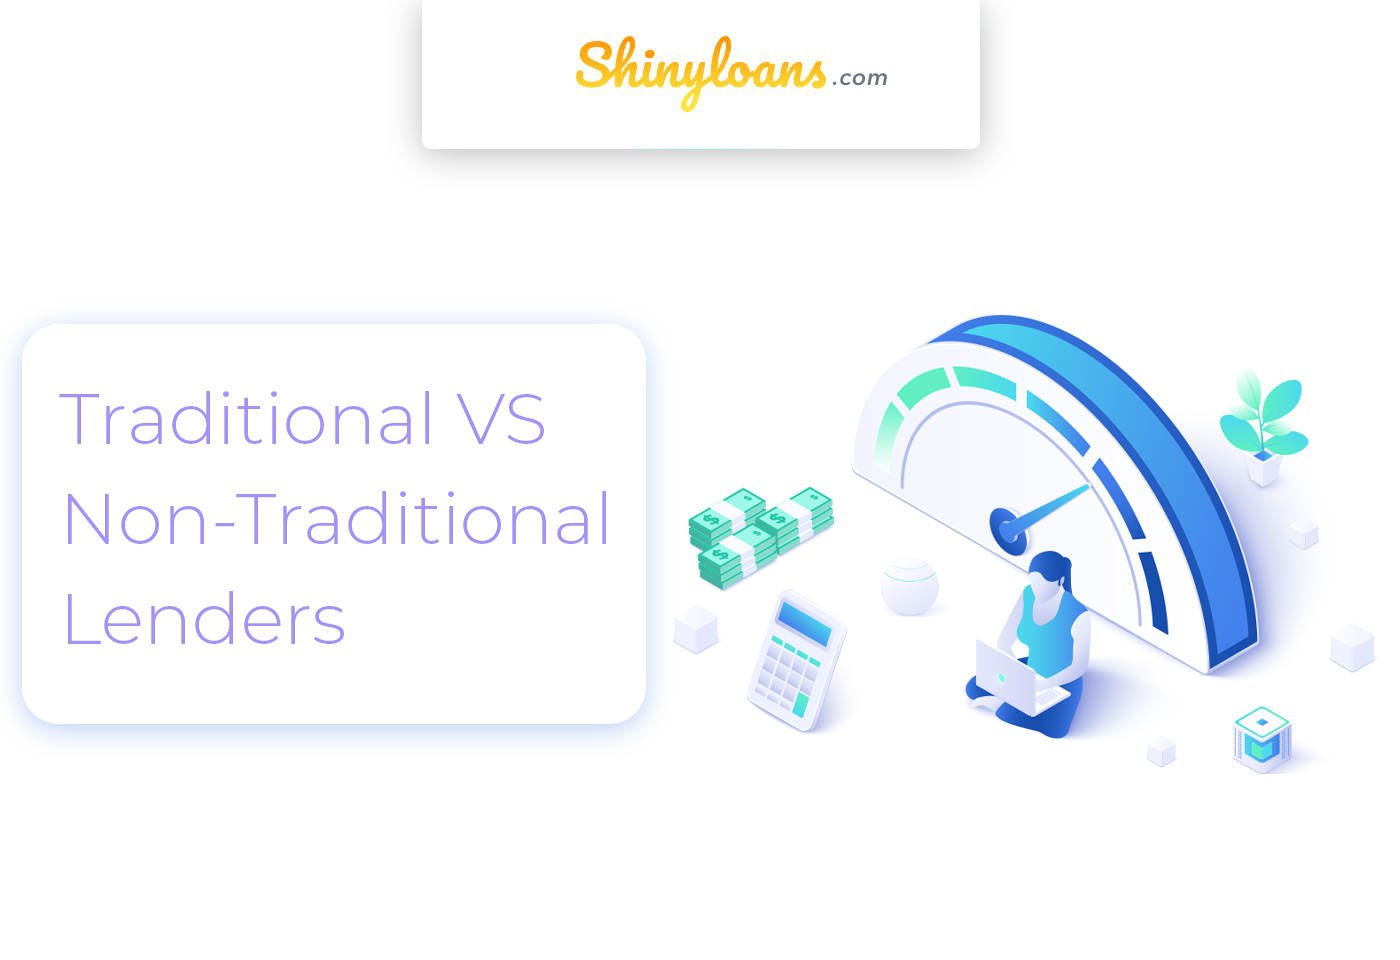 Traditional VS Non-Traditional Lenders